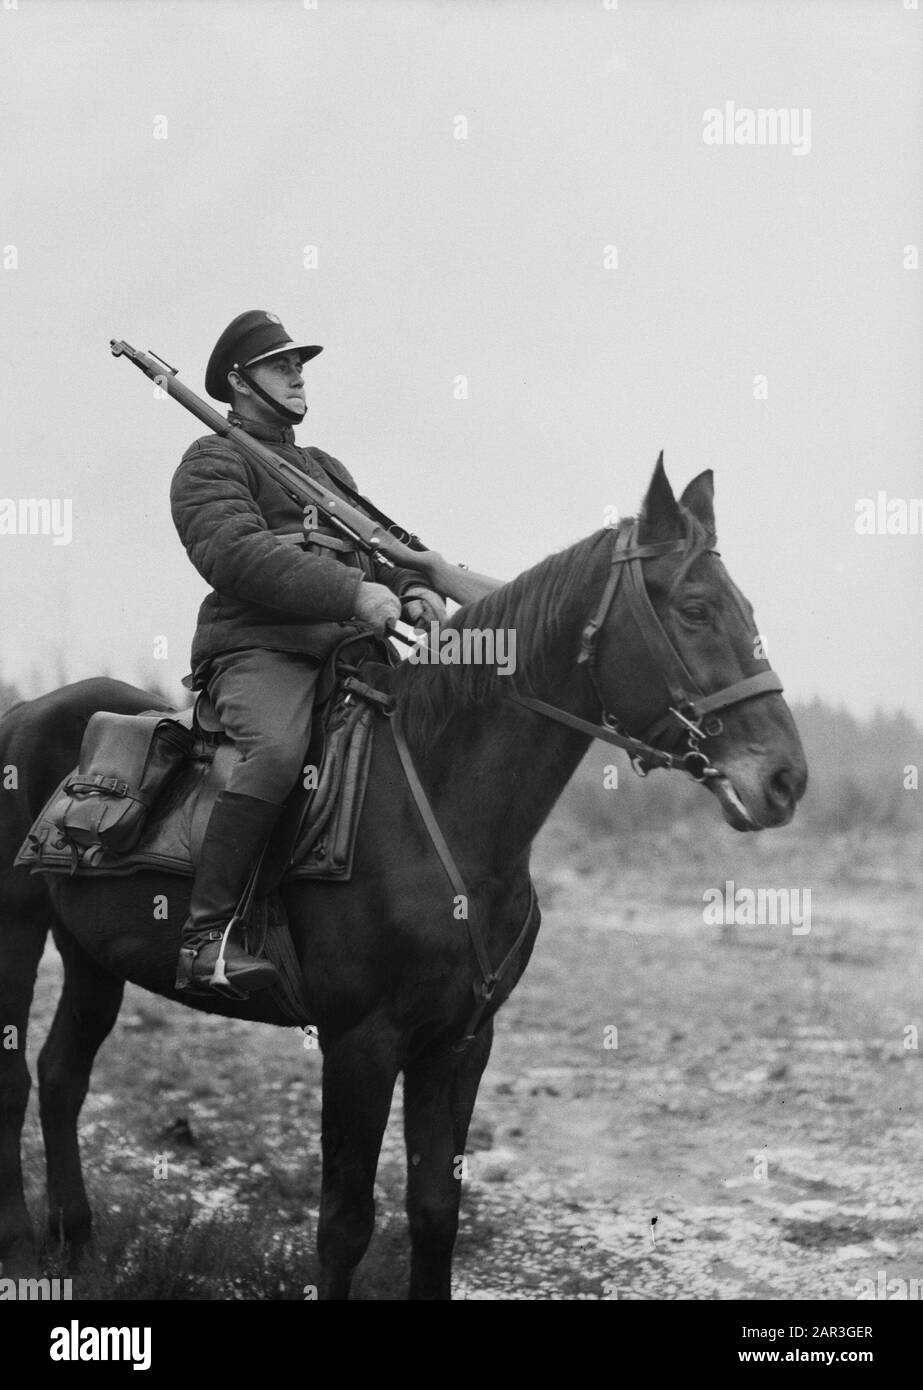 Travel to Poland  Military on horseback with loaded rifle at Stoubcy Annotation: Stoubcy in Belarus is the former Stolpce in Poland Date: 1934 Location: Belarus Keywords: military, horses Stock Photo